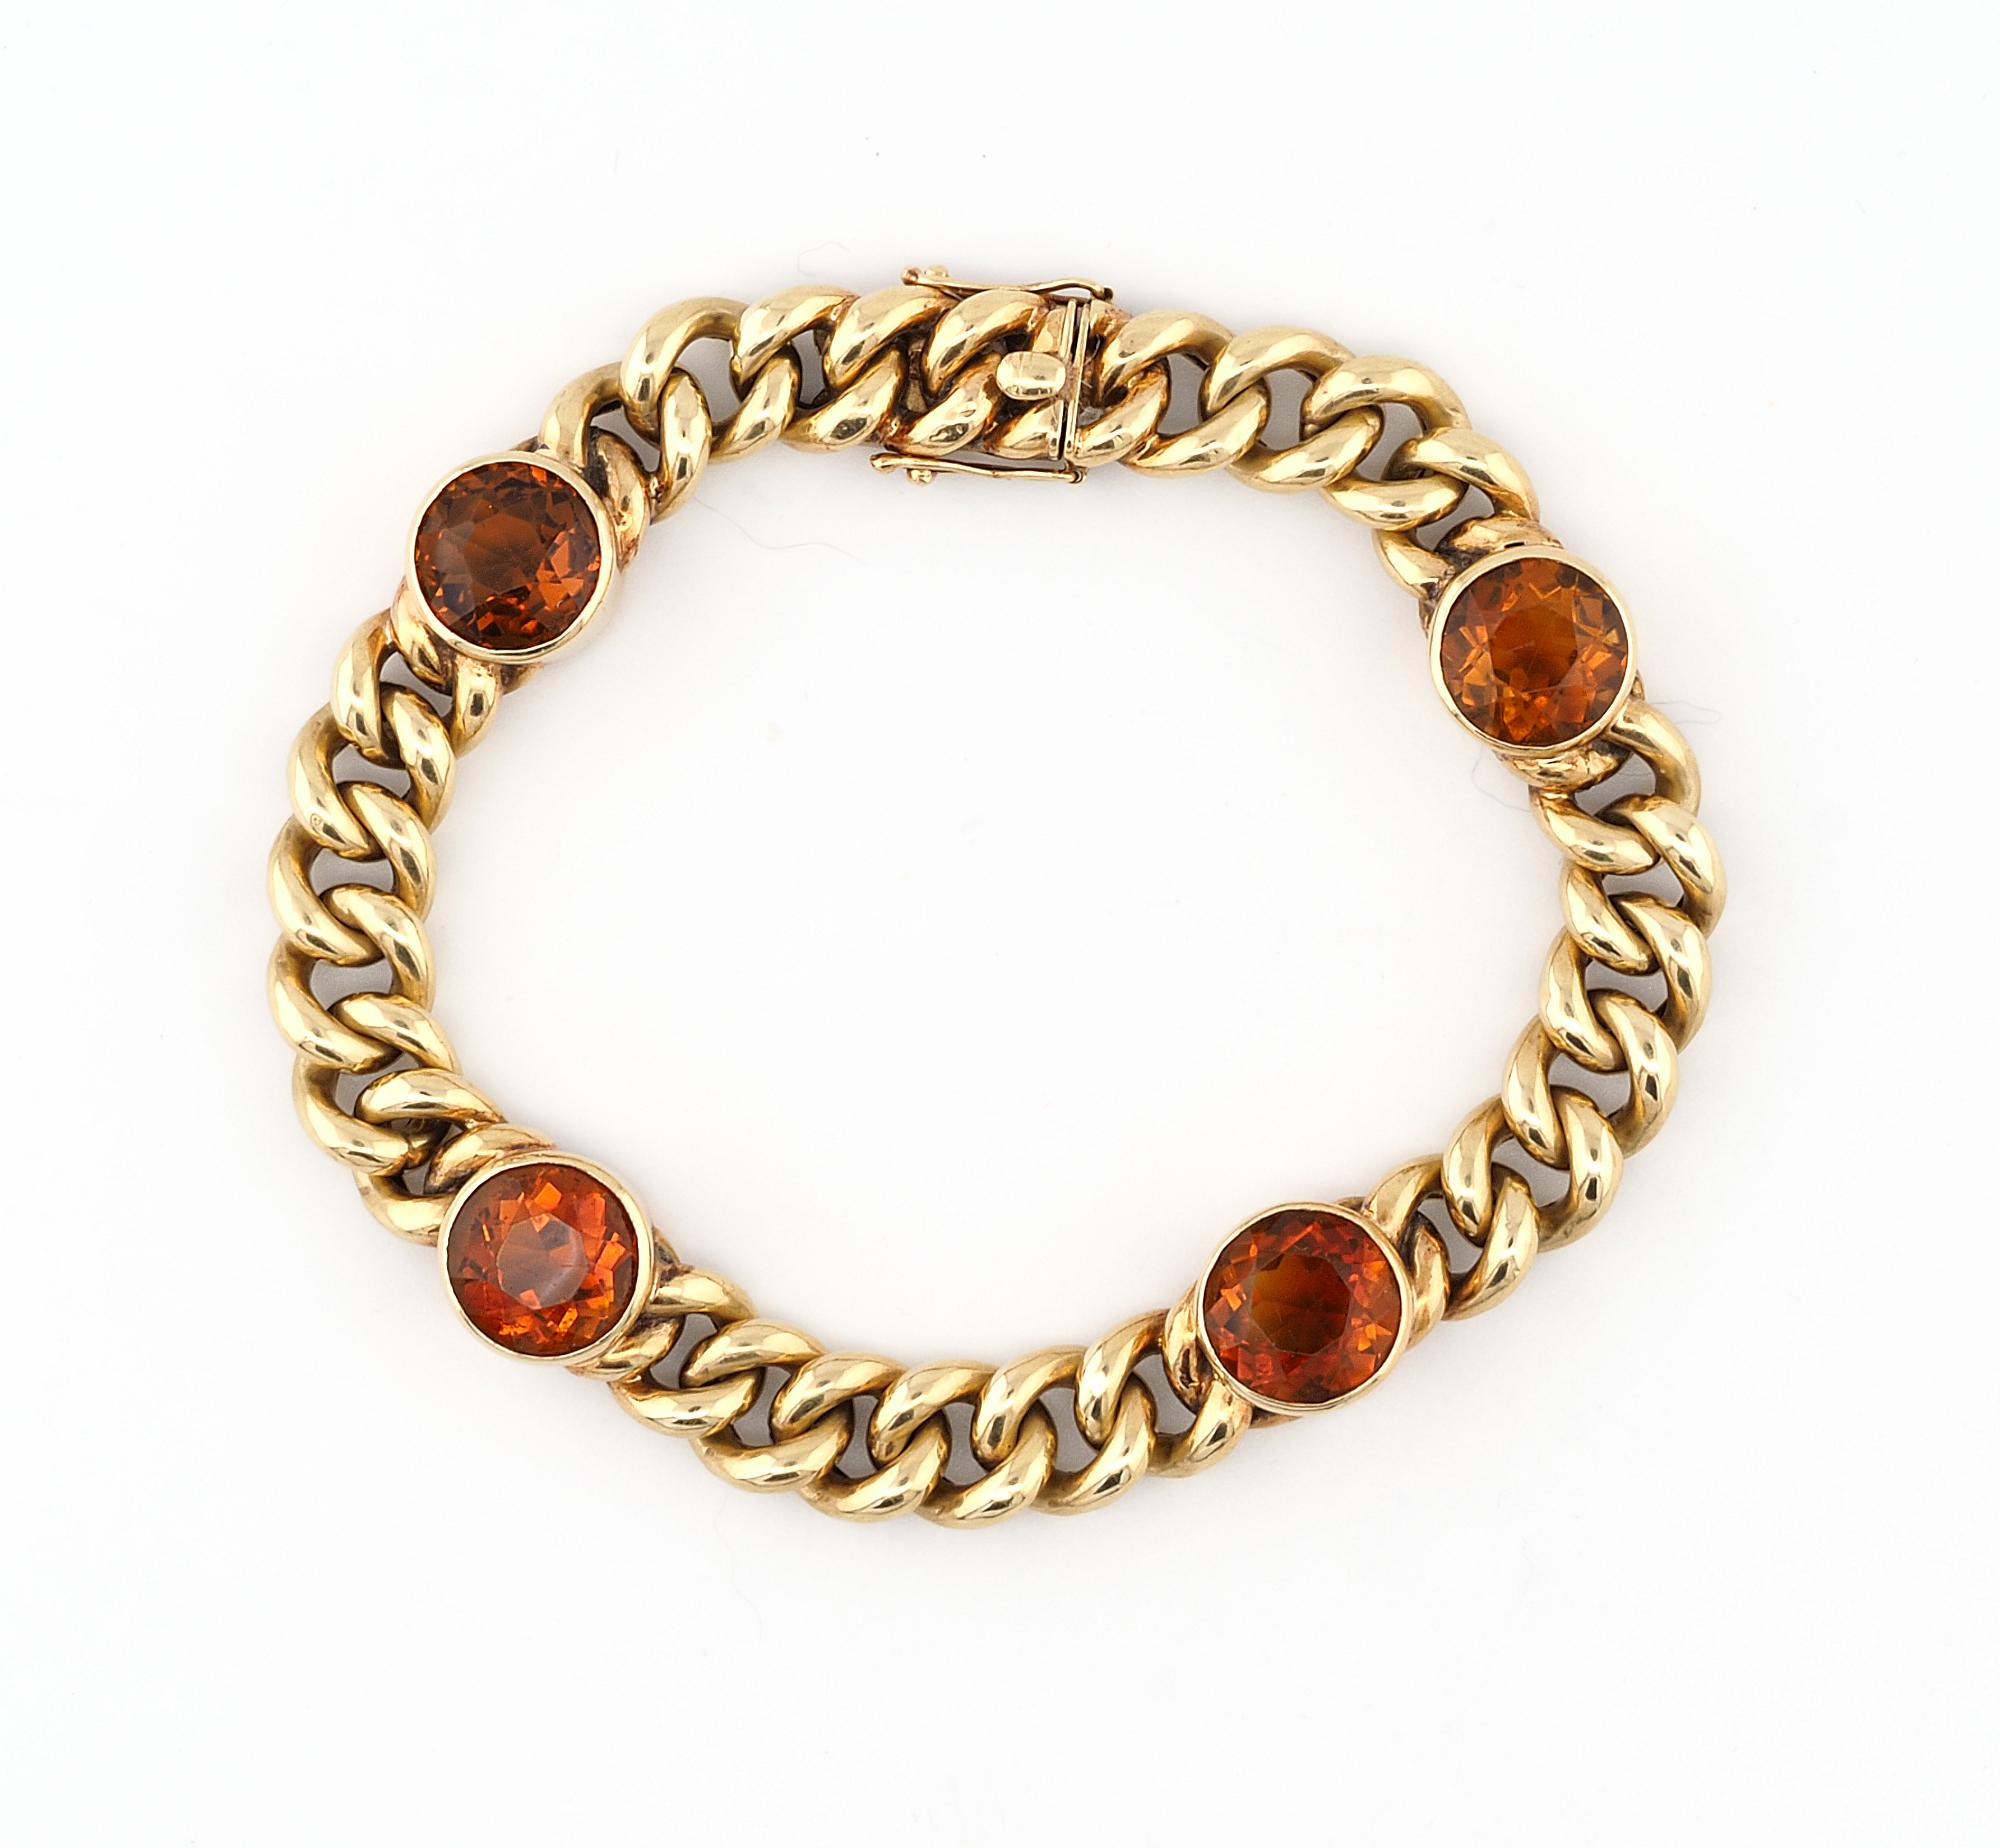 This stunning antique European curb bracelet is 19 35/40 ca.
Hand crafted of solid 14 KT gold , marked with several hallmarks
Classy smooth and soft gold curb links inter-spacing in between with round bezels of fine gemstones for colour impact,